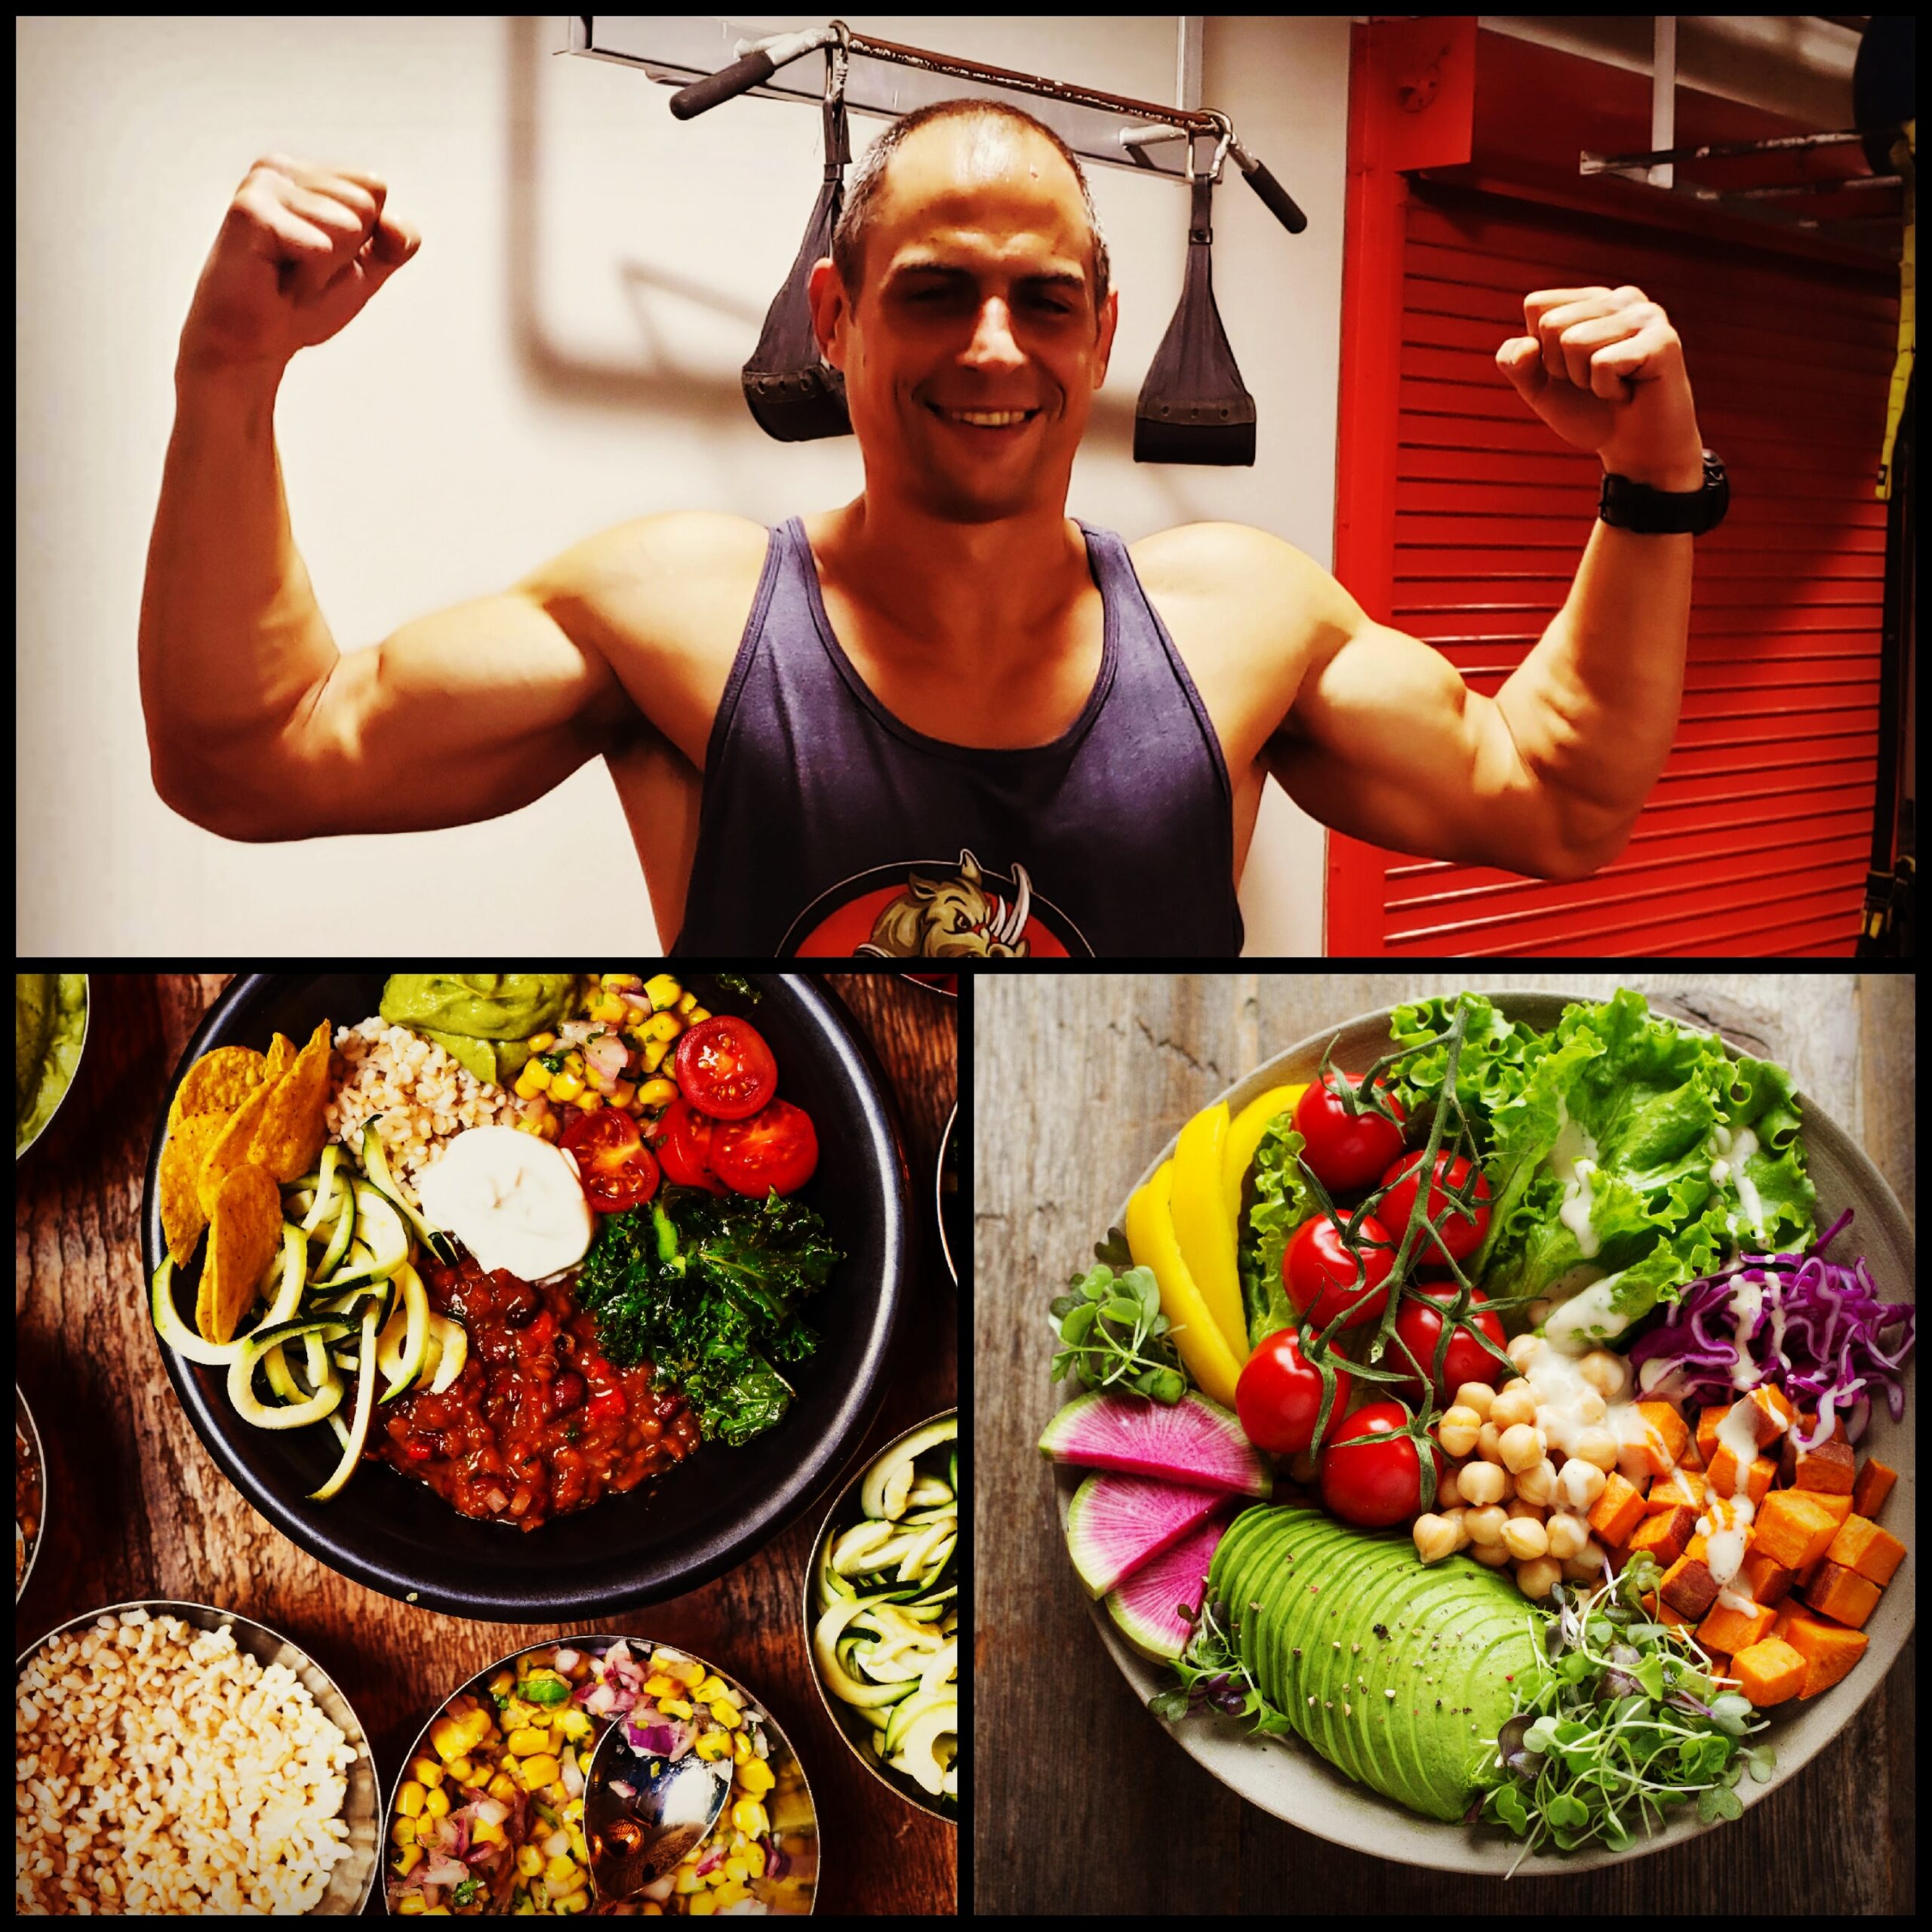 A man flexing his arm muscles with lots of vegetable dishes on bowls